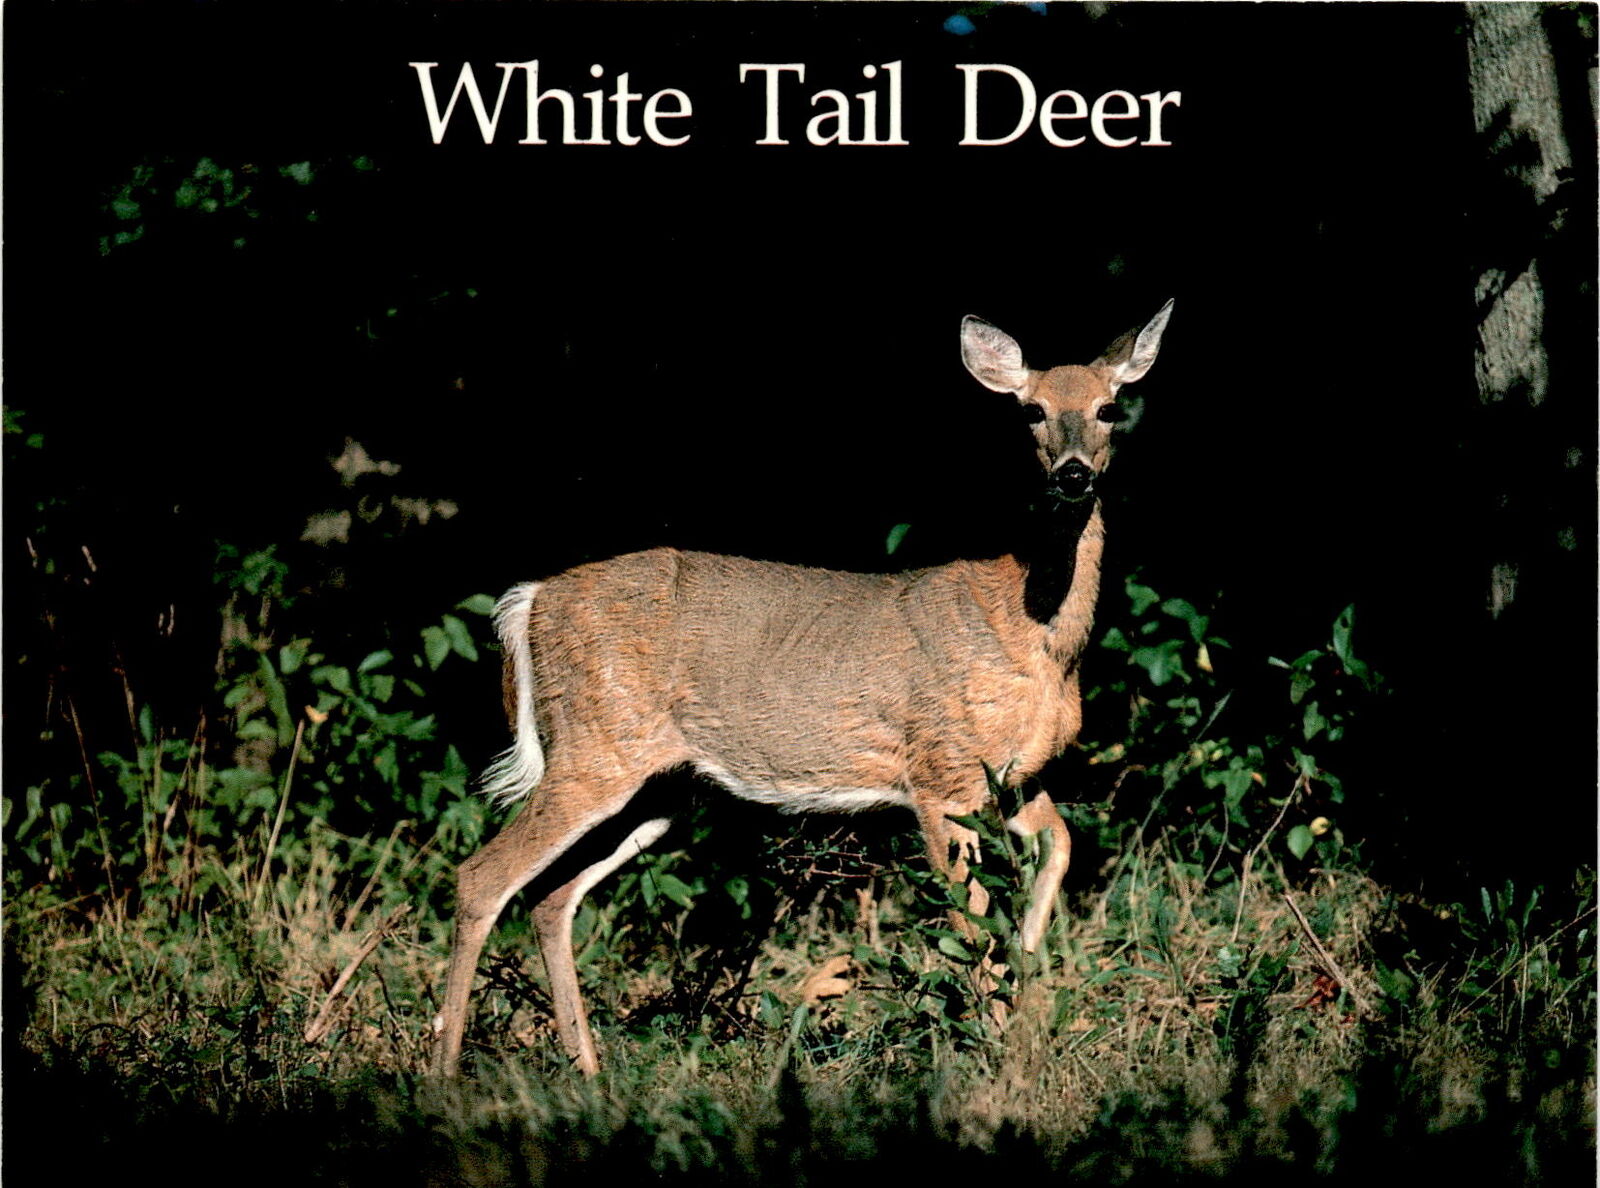 Eau Claire, Wisconsin, natural beauty, wildlife, White Tail Deer, Seth  Postcard